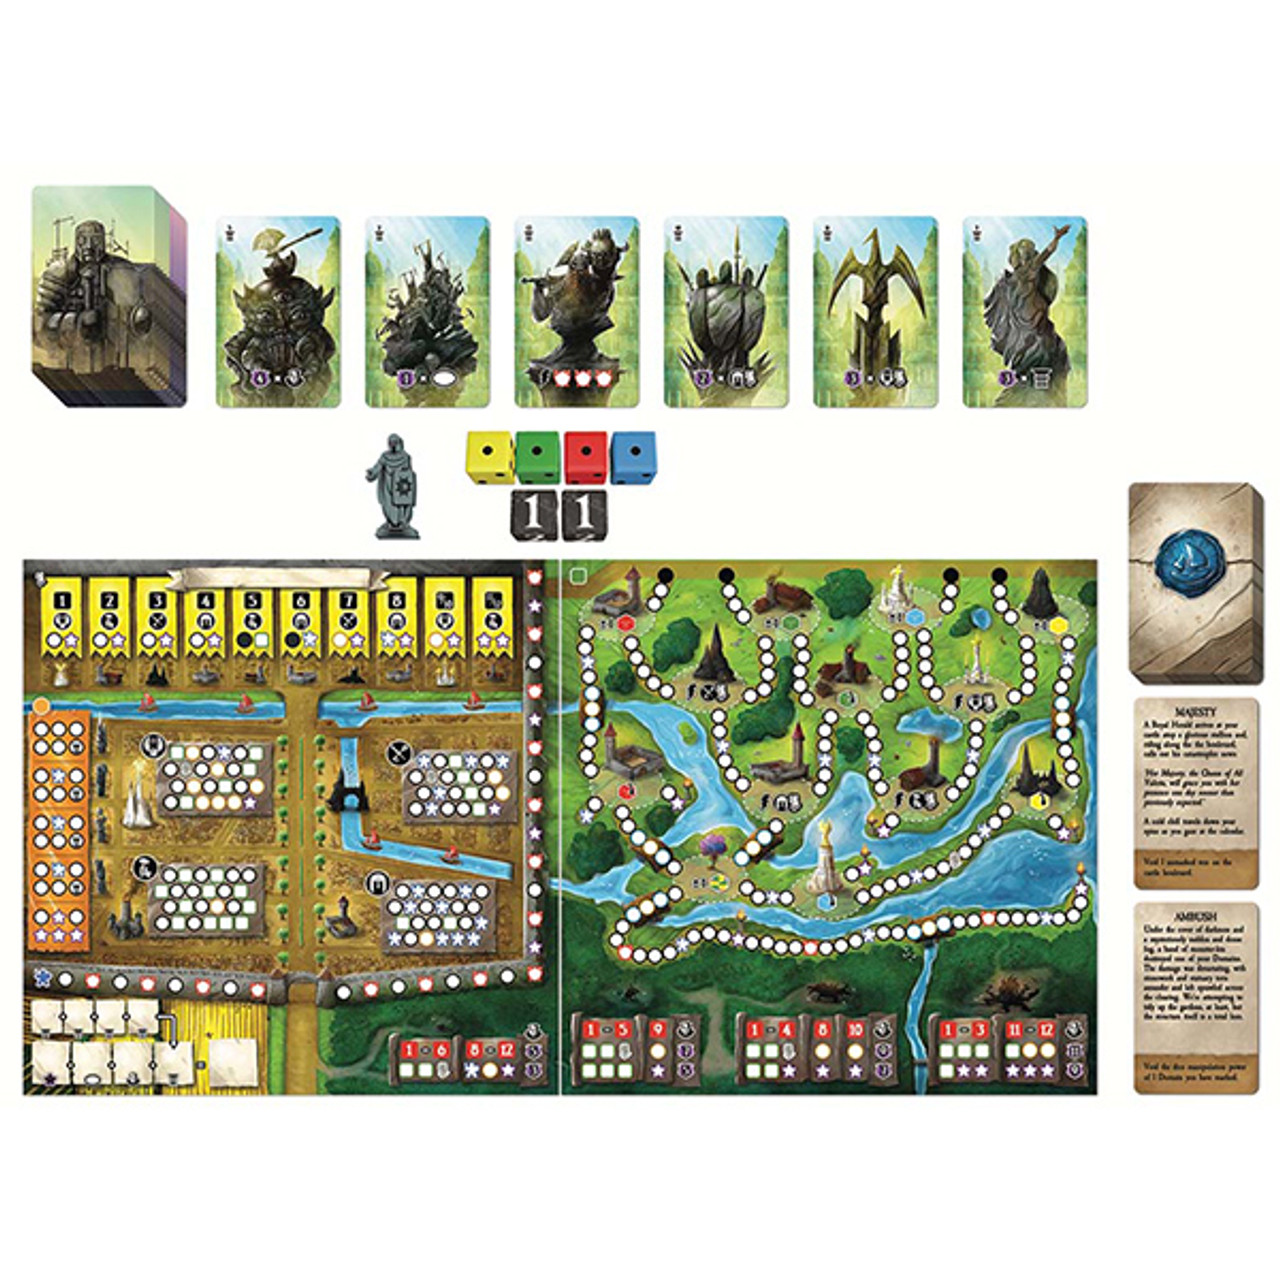 824 – Dice Kingdoms of Valeria [Preview] – What's Eric Playing?